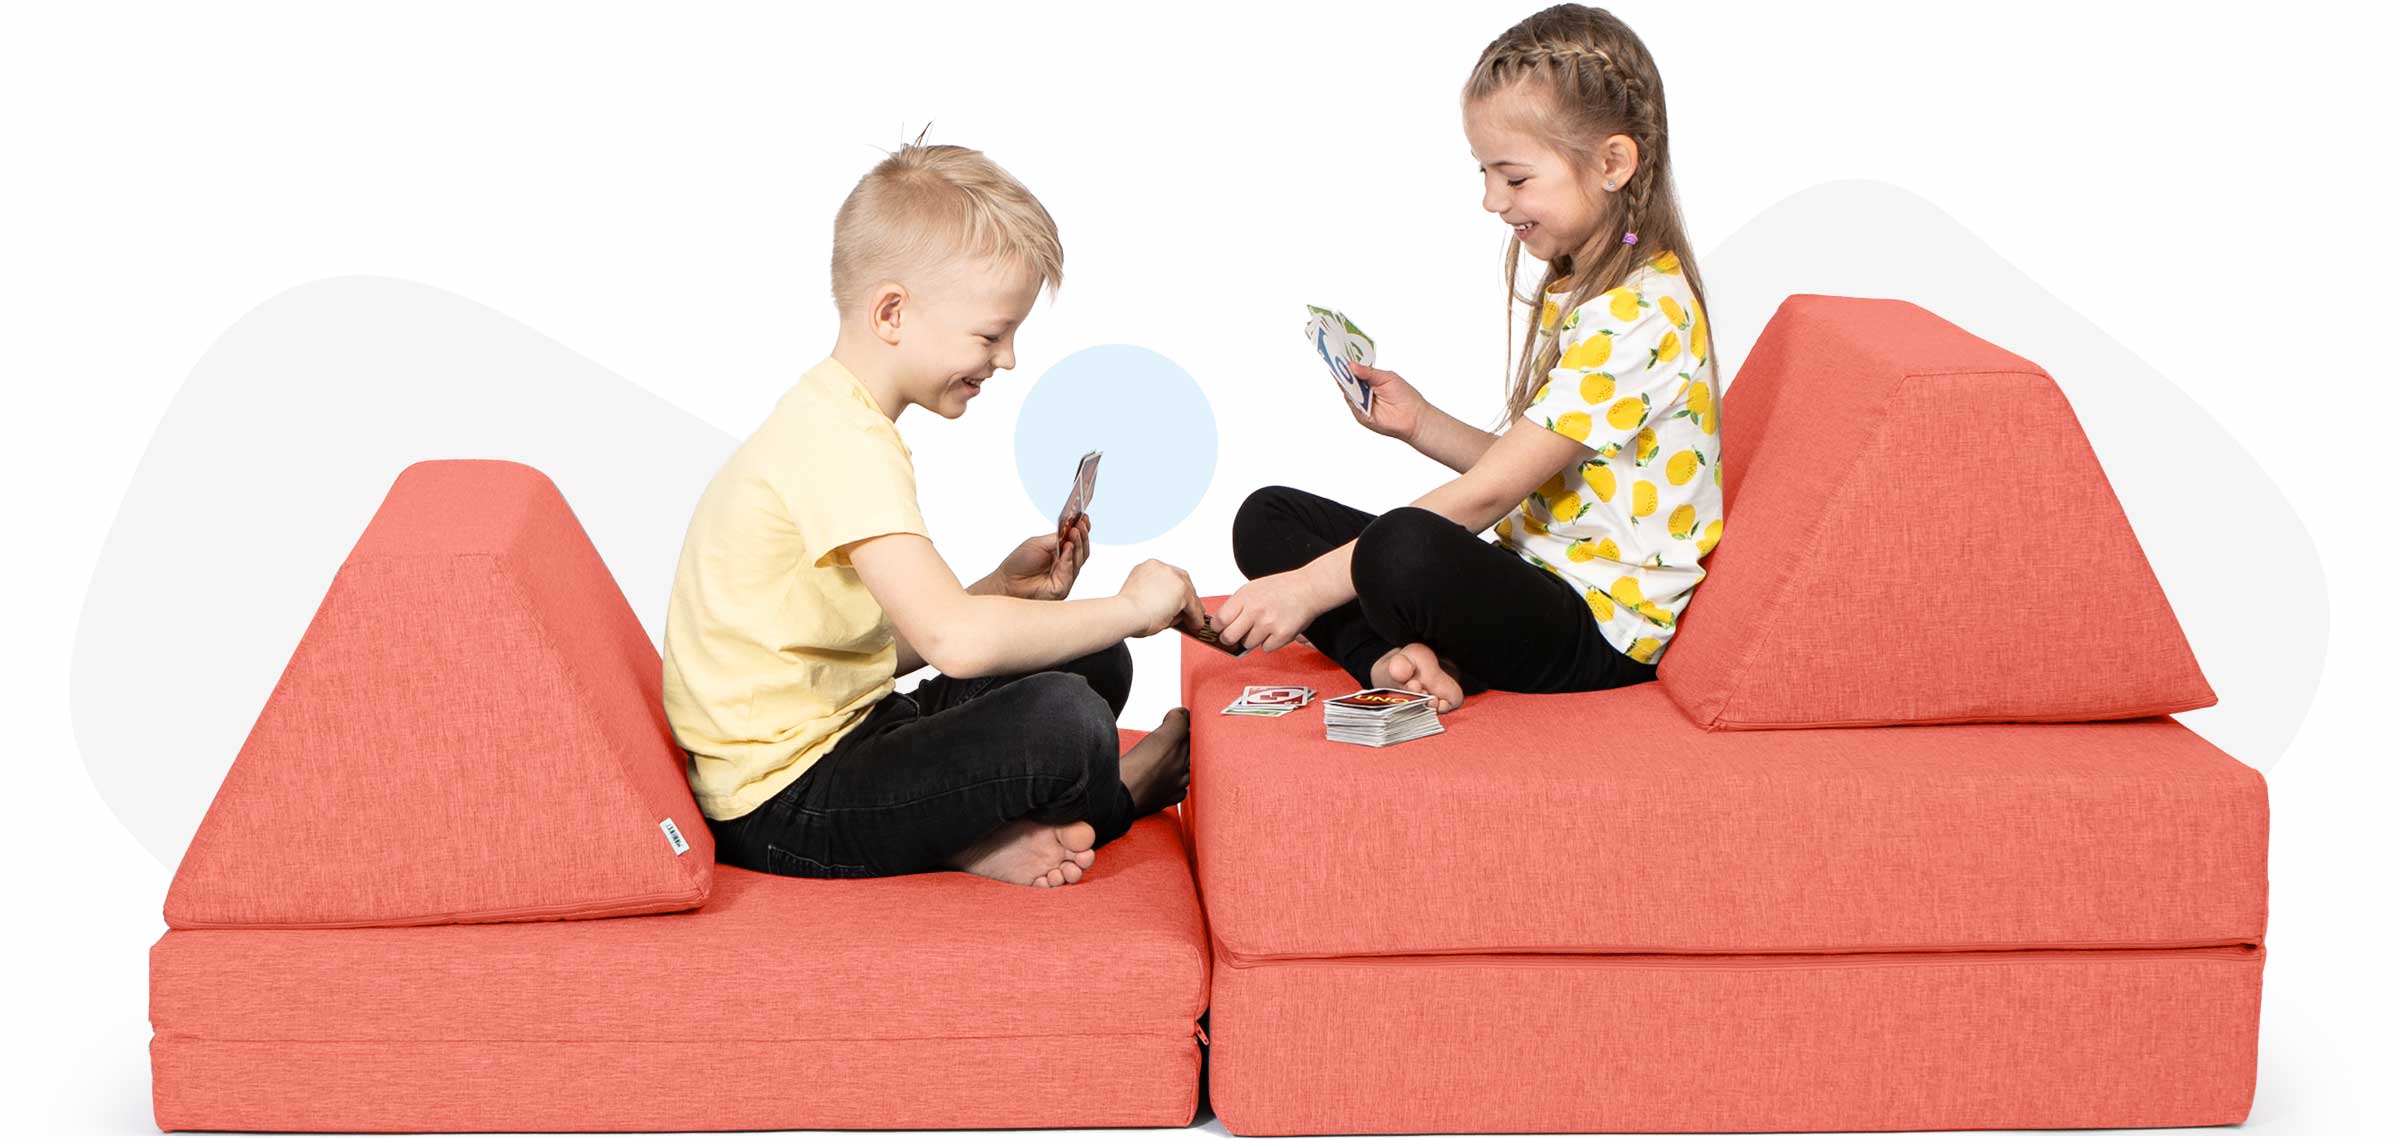 Kids sitting and playing cards on a coral Monboxy sofa